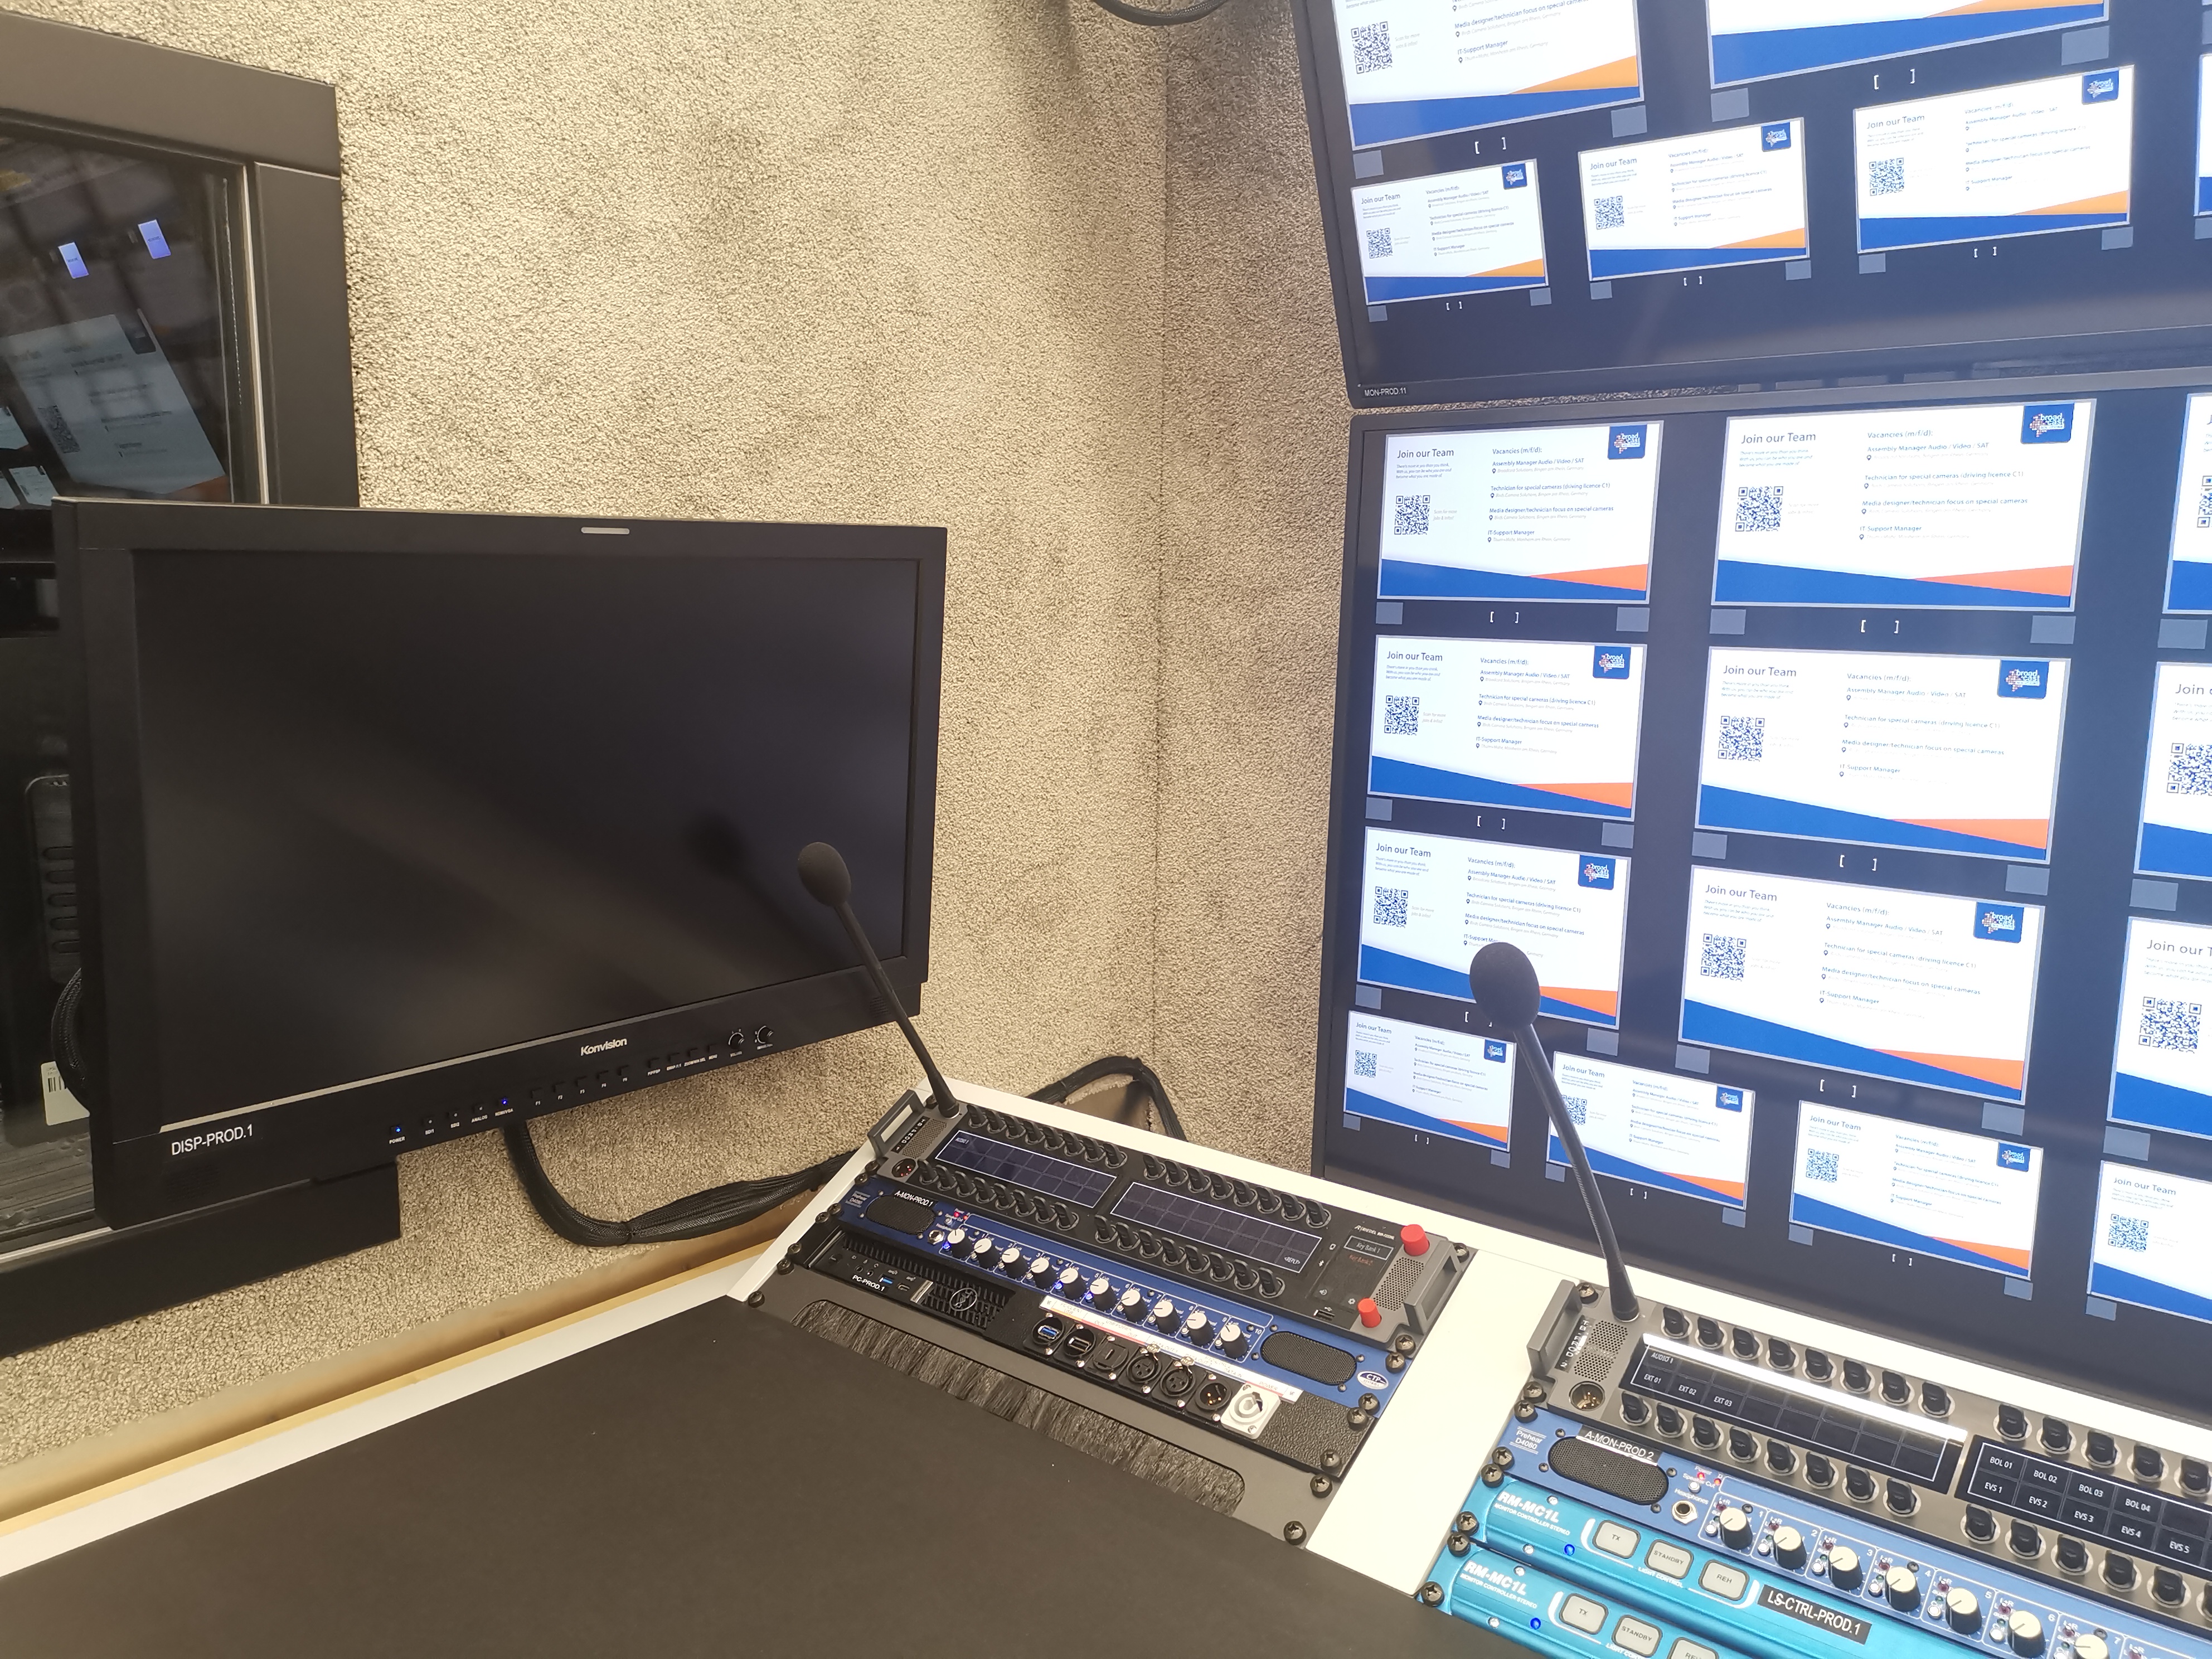 Konvision monitors were adopted by South Africa’s SuperSport IP2 broadcast truck